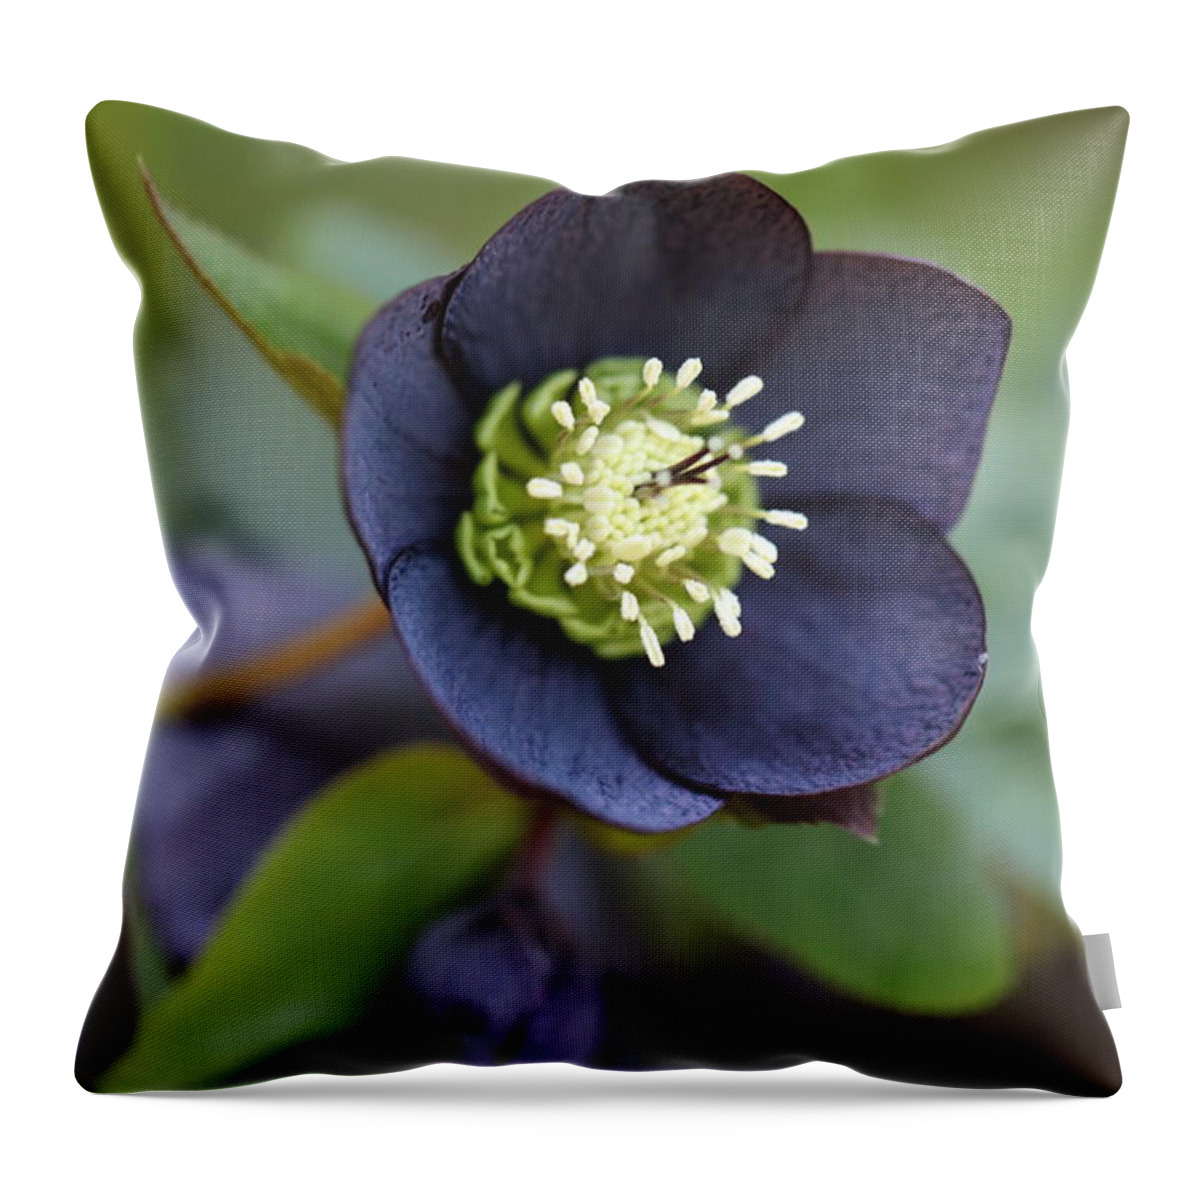 Helleborus Orientalis Throw Pillow featuring the photograph Hellebore by Tammy Pool